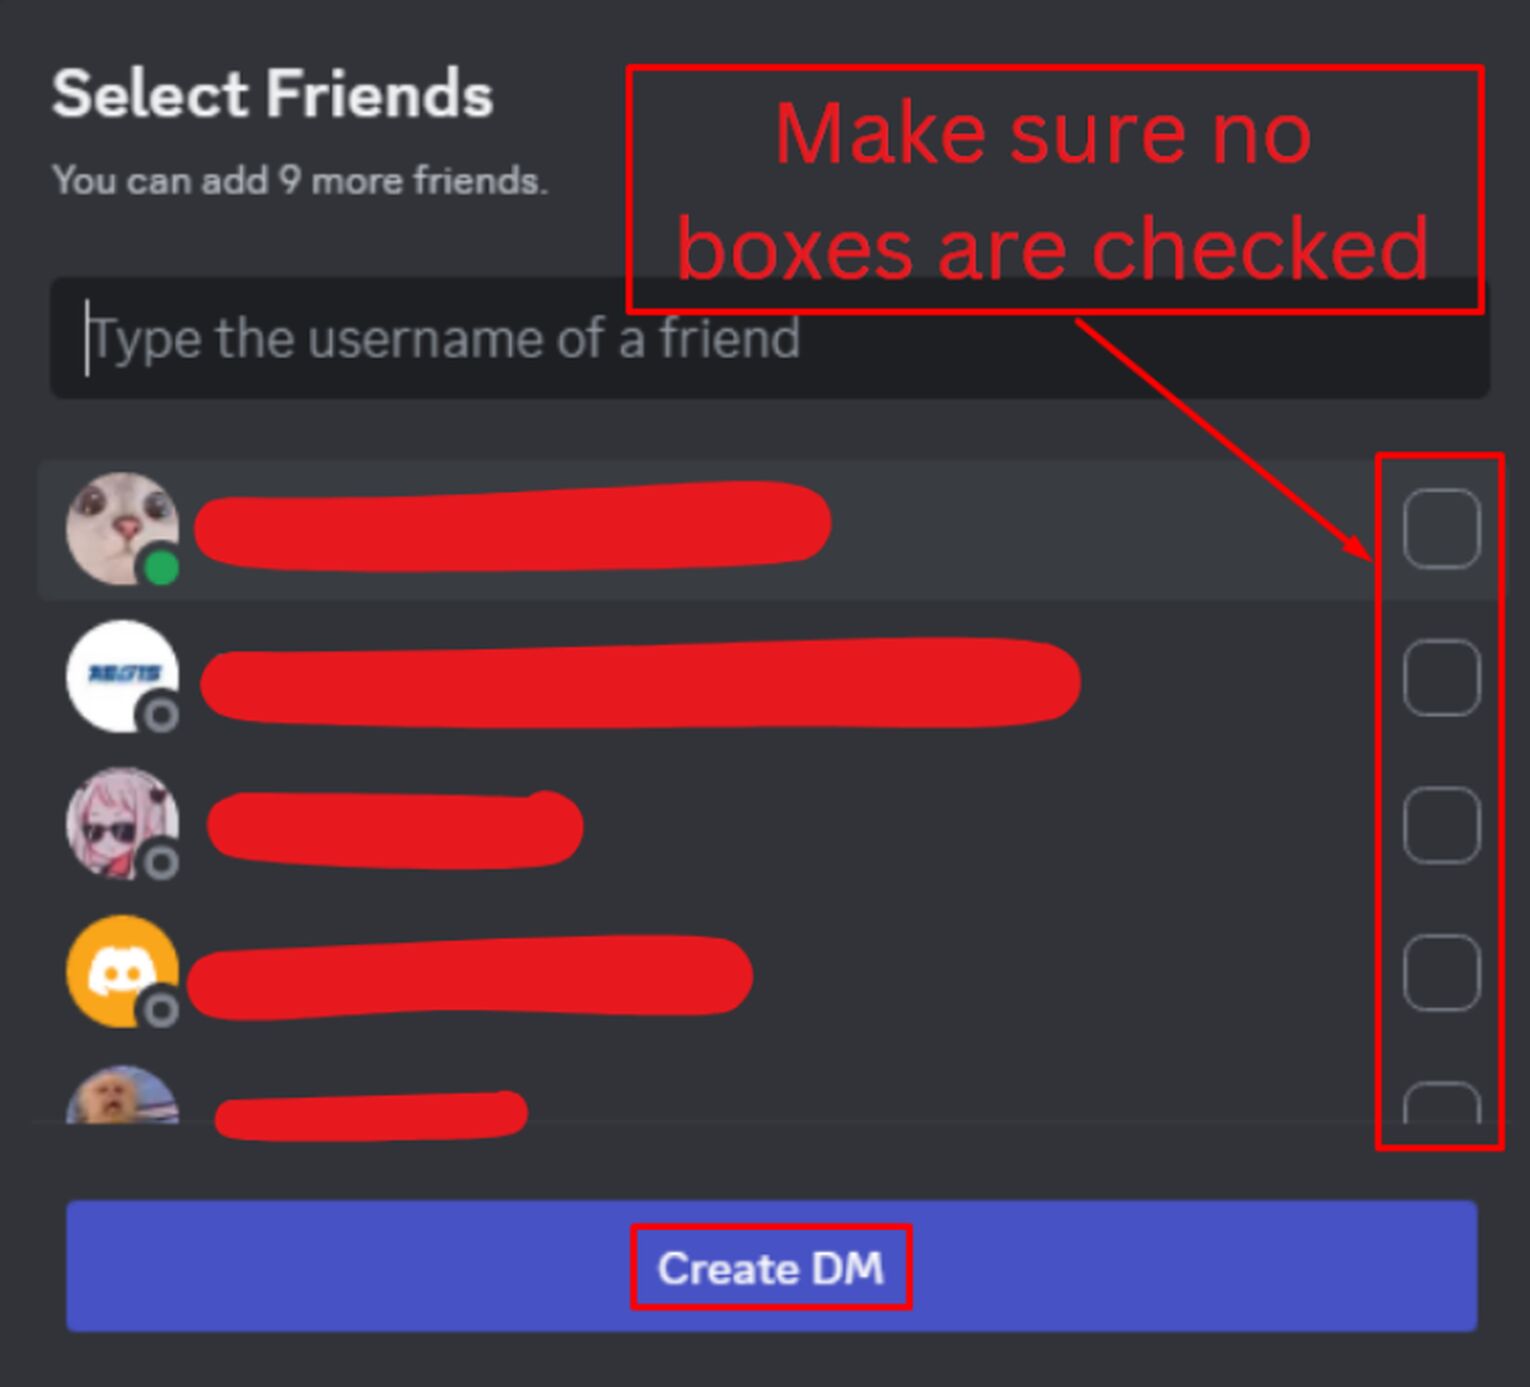 Do Not Add Anyone, And Click Create DM